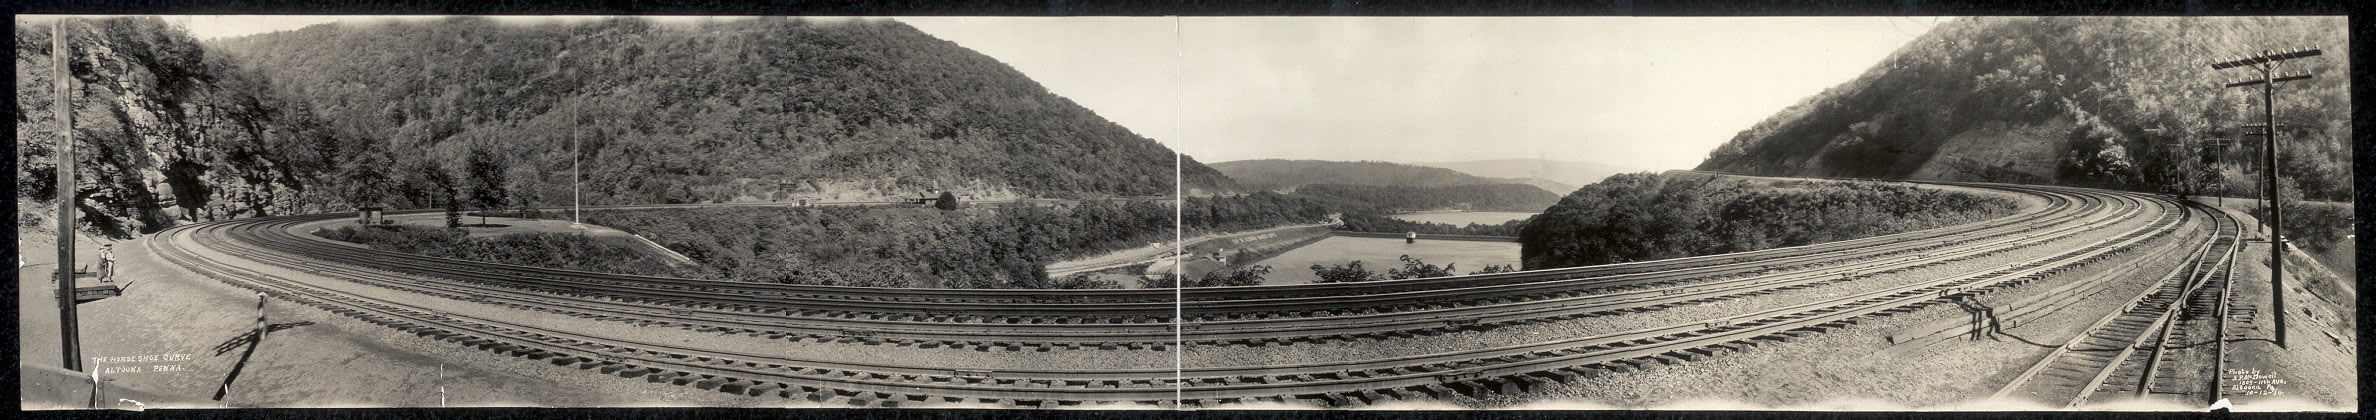 Panorama view of the Horseshoe Curve